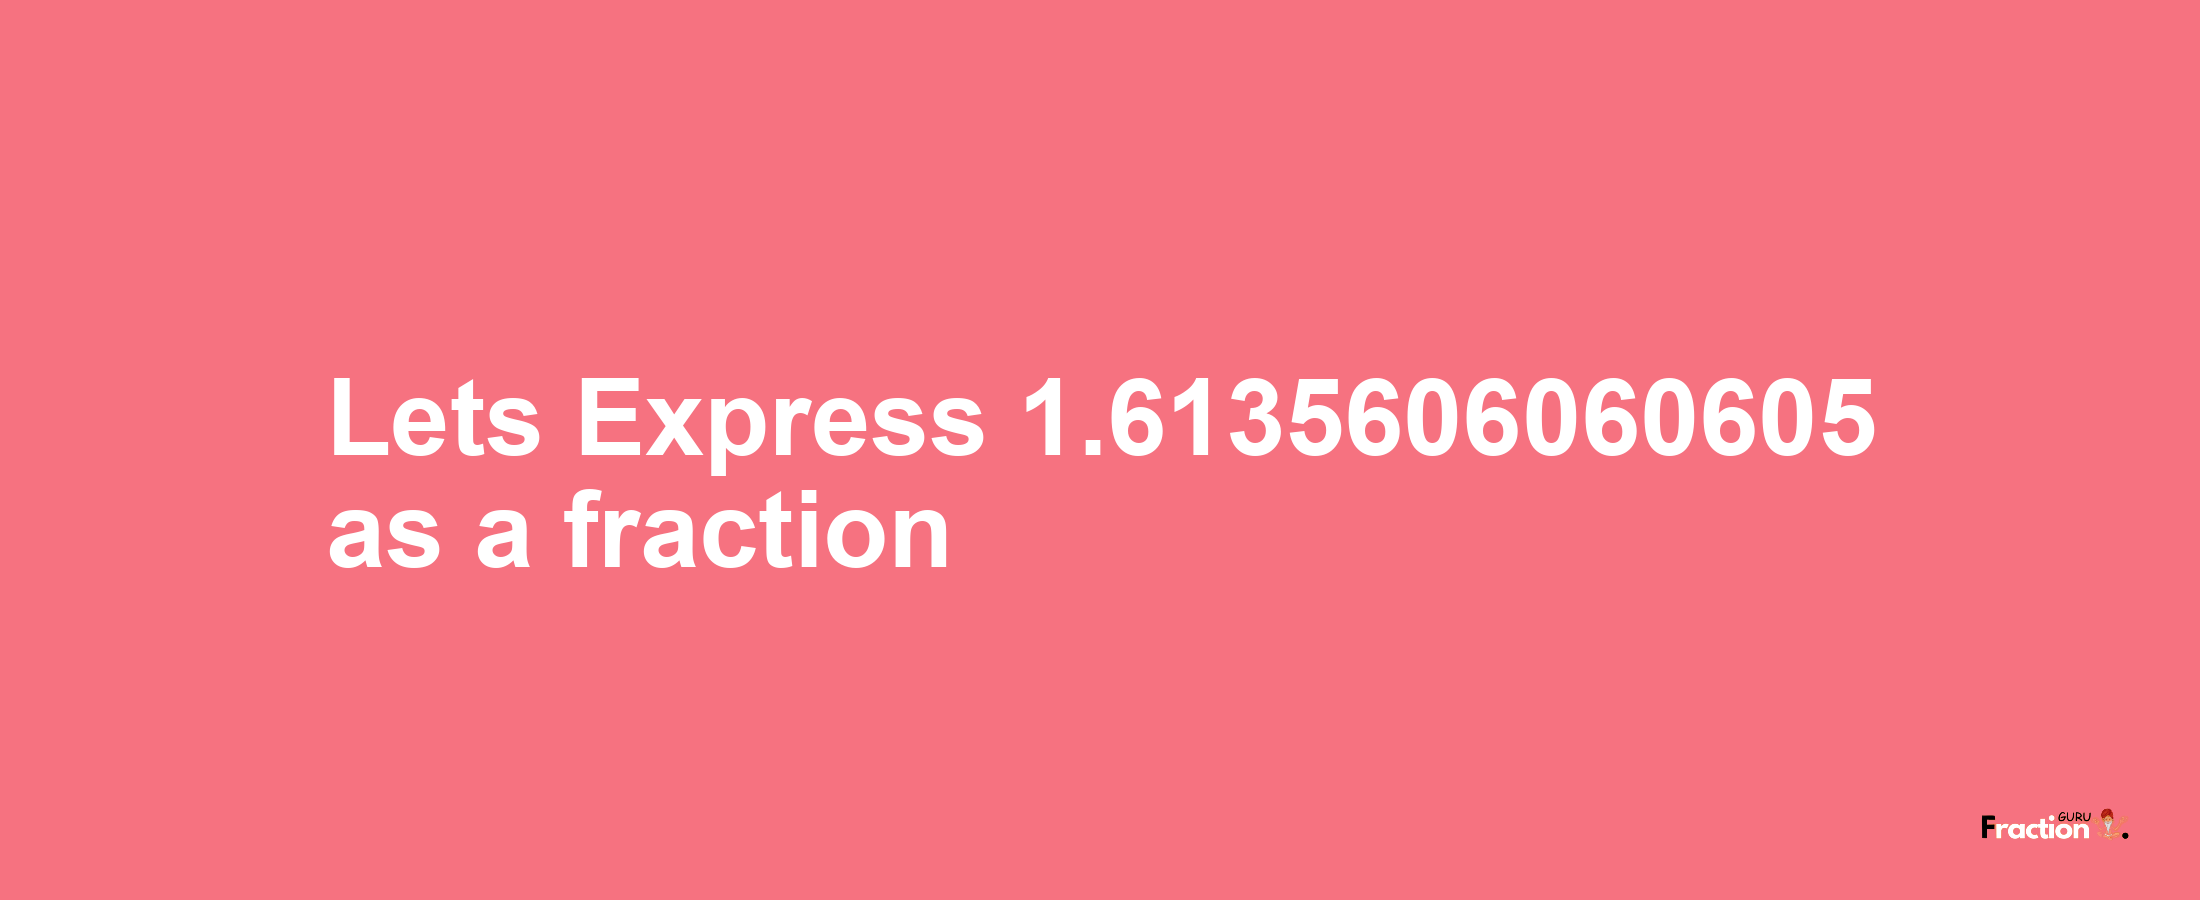 Lets Express 1.6135606060605 as afraction